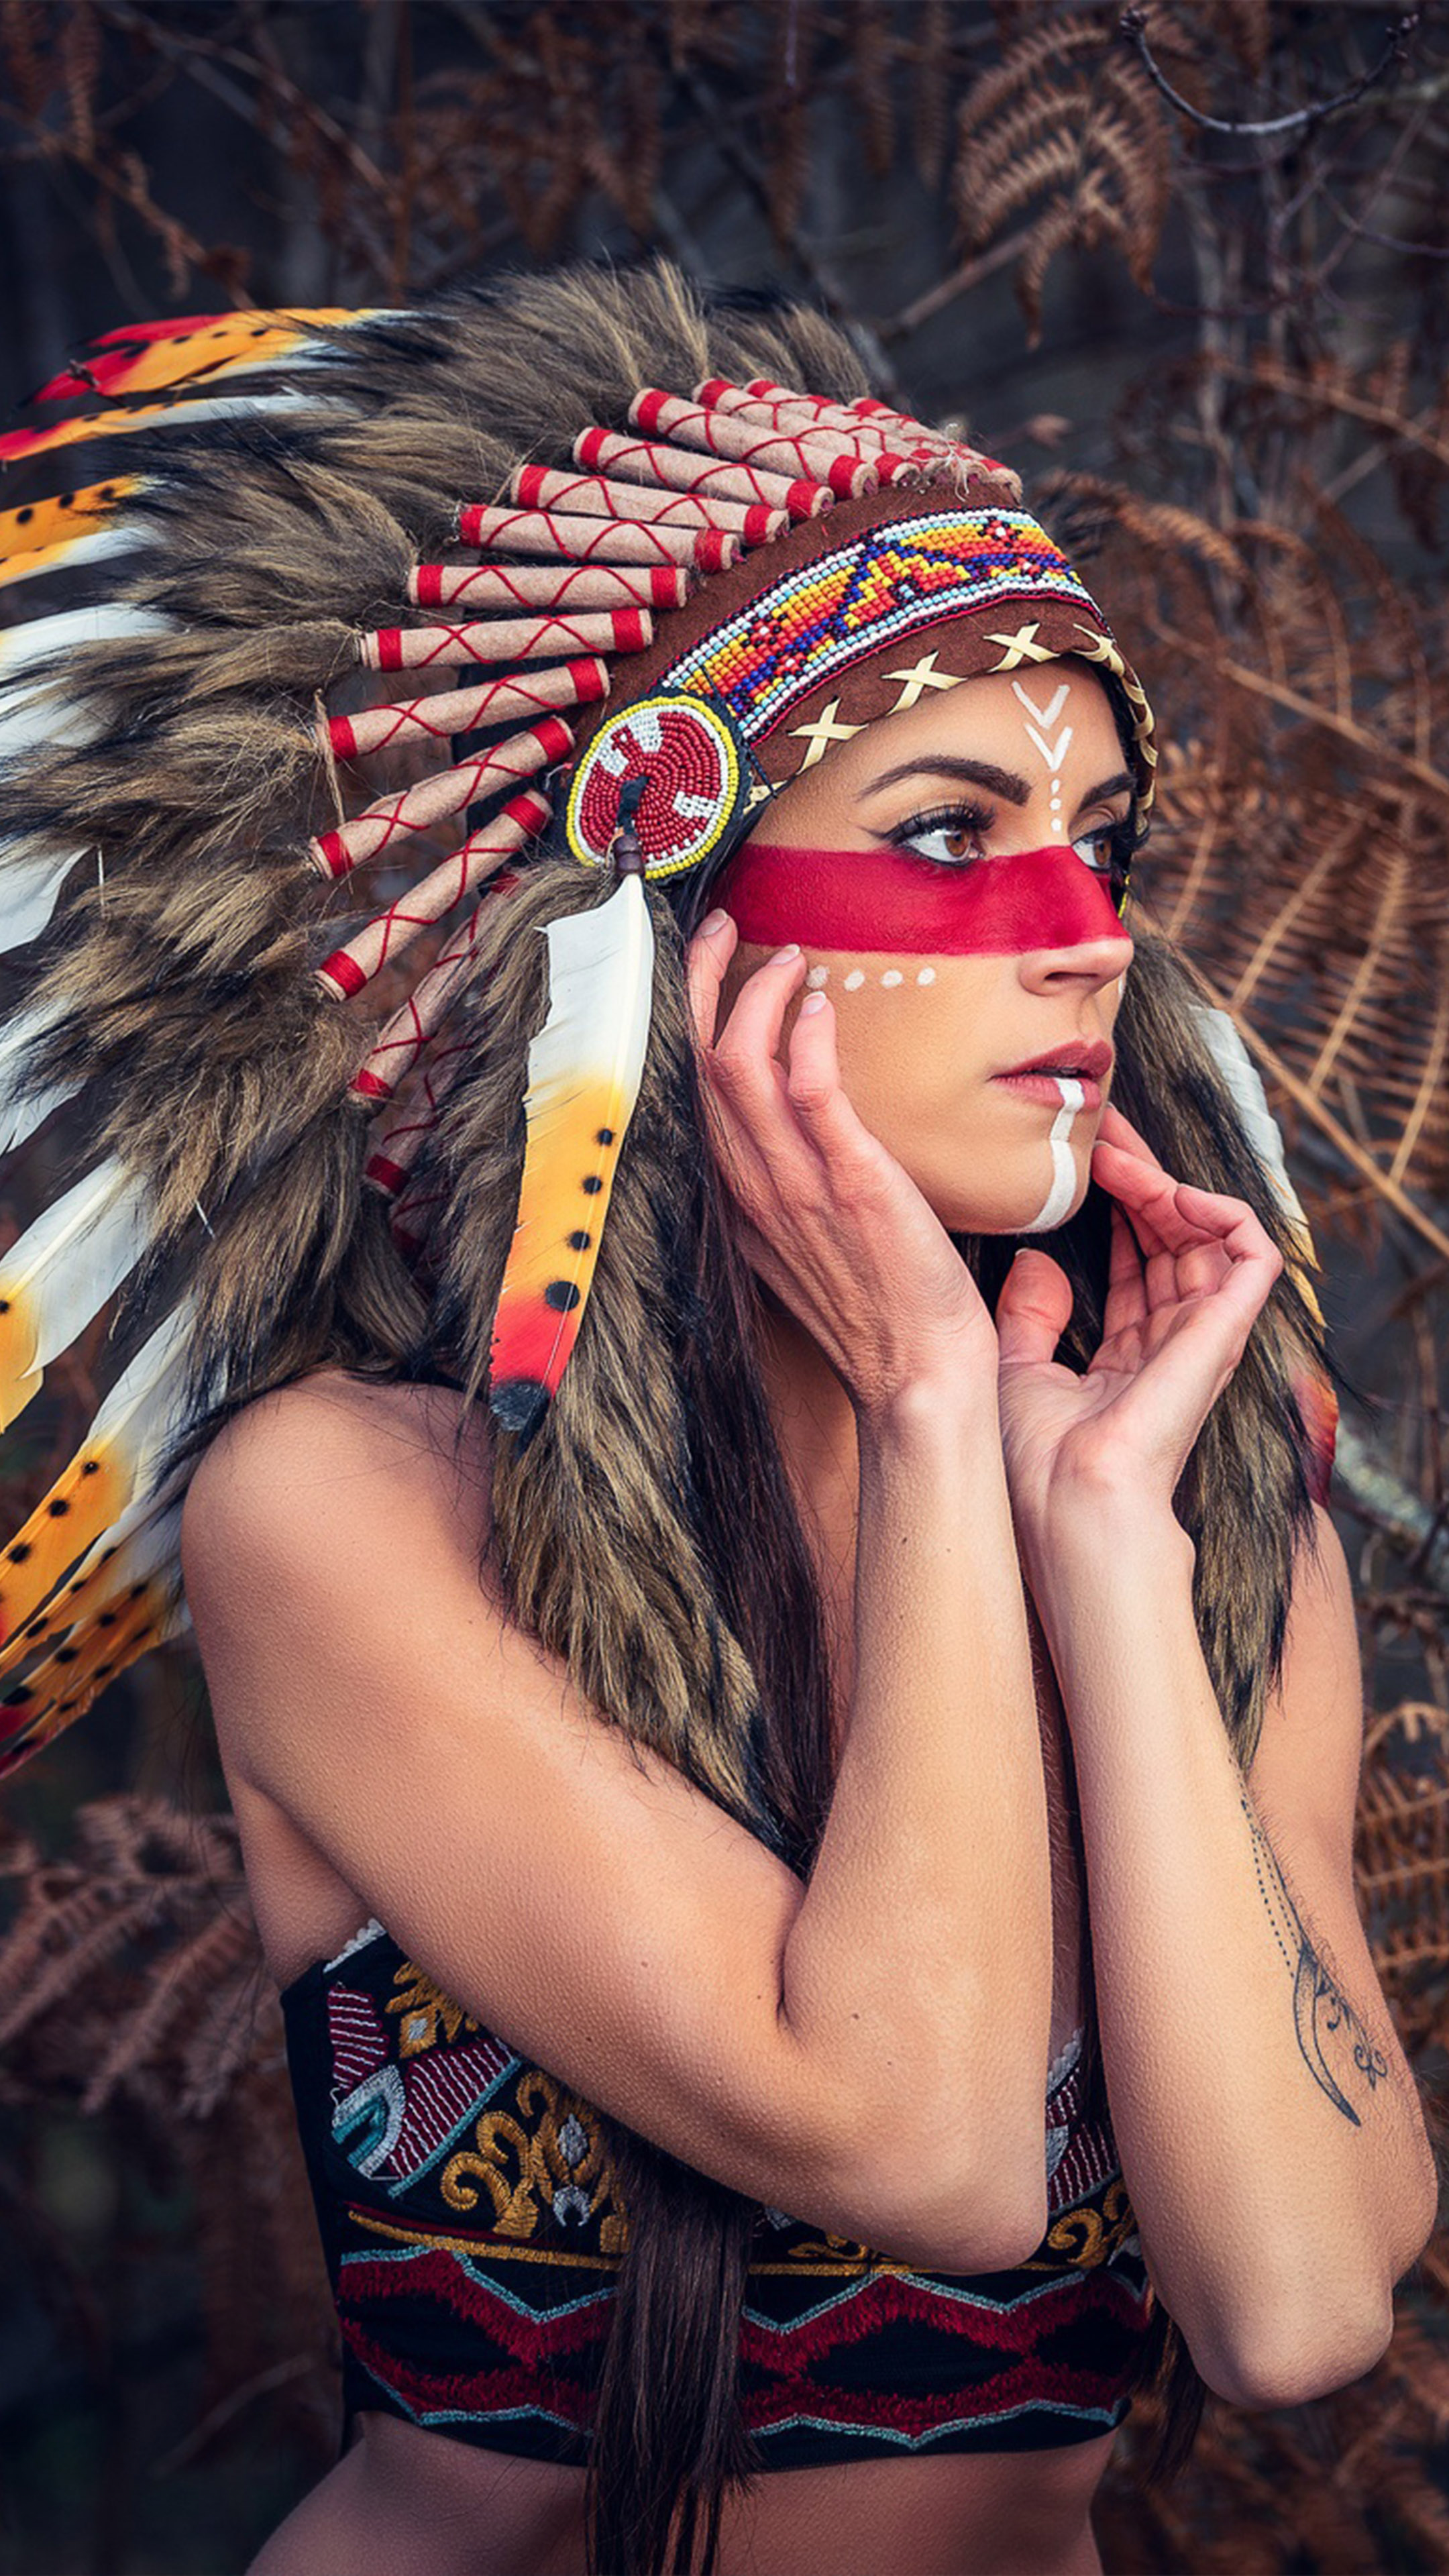 Discover more than 70 native american wallpapers - in.cdgdbentre